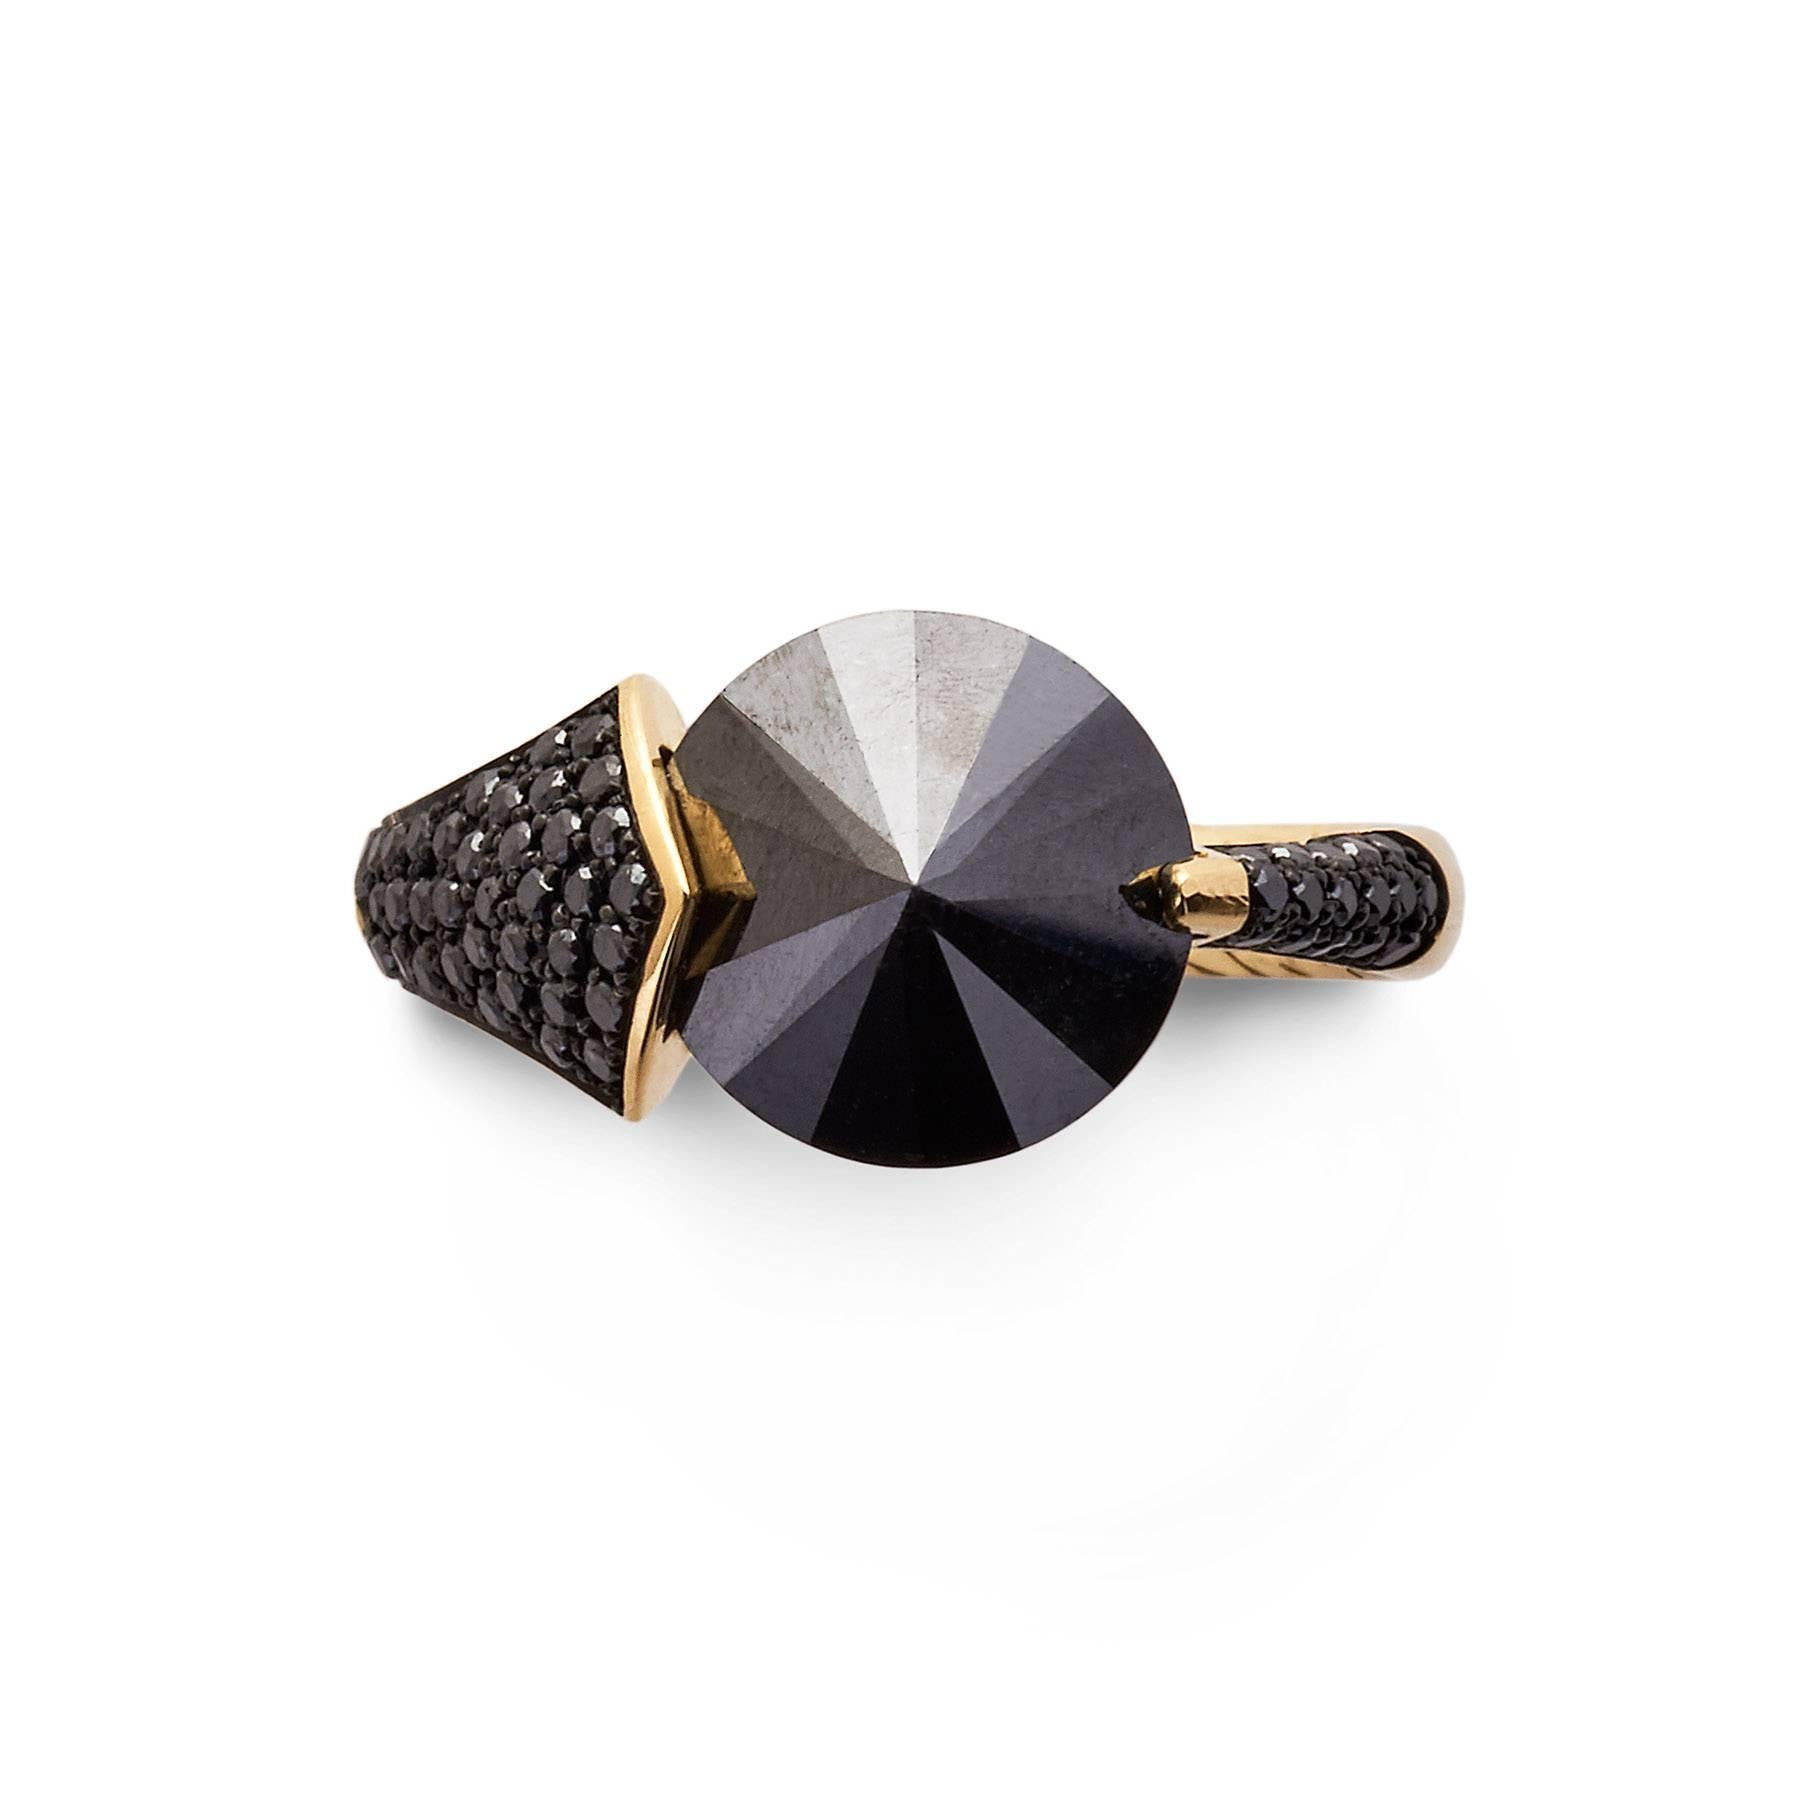 18ct yellow gold with a central black diamond weighing 4.98cts and 0.33ct black diamond pavé shoulders
Limited edition of five
Made in London

The Bear Claw Ring, like the Bear Claw Cuff, was inspired by an image of a wild black bear. Sharp and